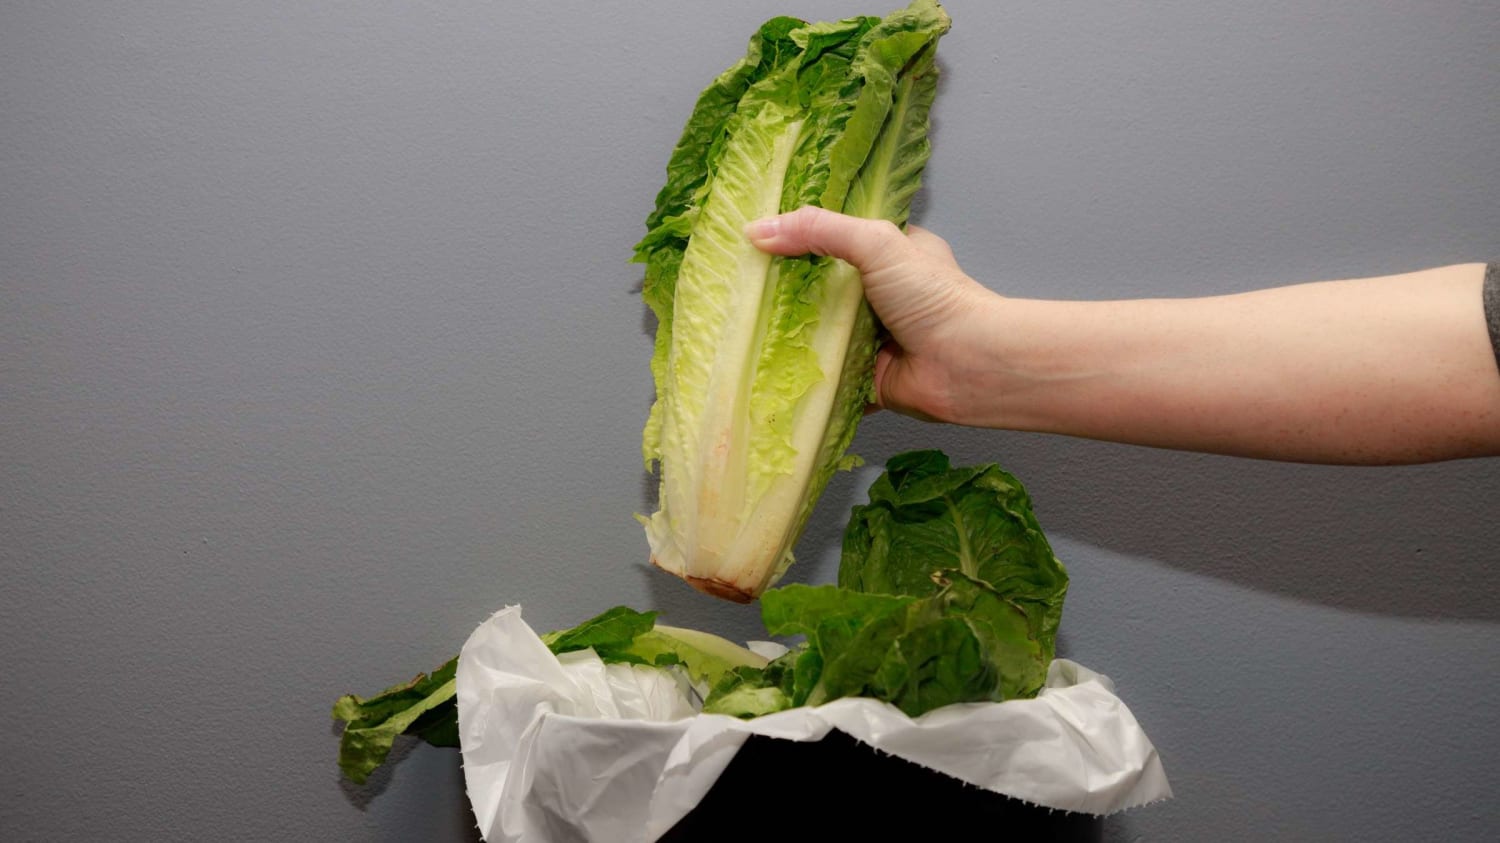 Romaine Lettuce Recalled After Another National E. Coli Outbreak